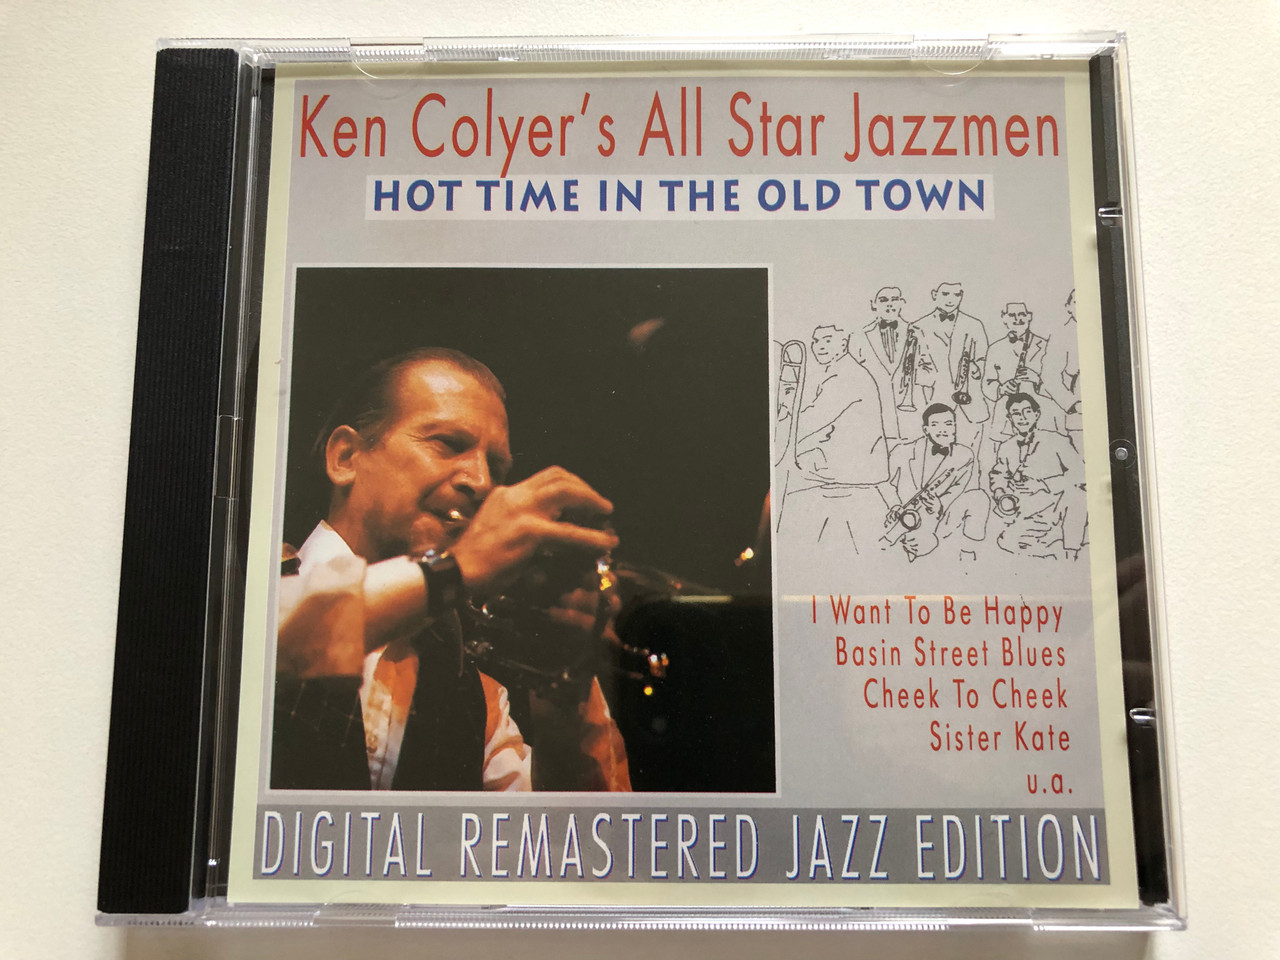 https://cdn10.bigcommerce.com/s-62bdpkt7pb/products/0/images/310798/Ken_Colyers_All_Star_Jazzmen_Hot_Time_In_The_Old_Town_I_Want_To_Be_Happy_Basin_Street_Blues_Cheek_To_Cheek_Sister_Kate_u._a._Pastels_Audio_CD_1995_20_1__25482.1699455153.1280.1280.JPG?c=2